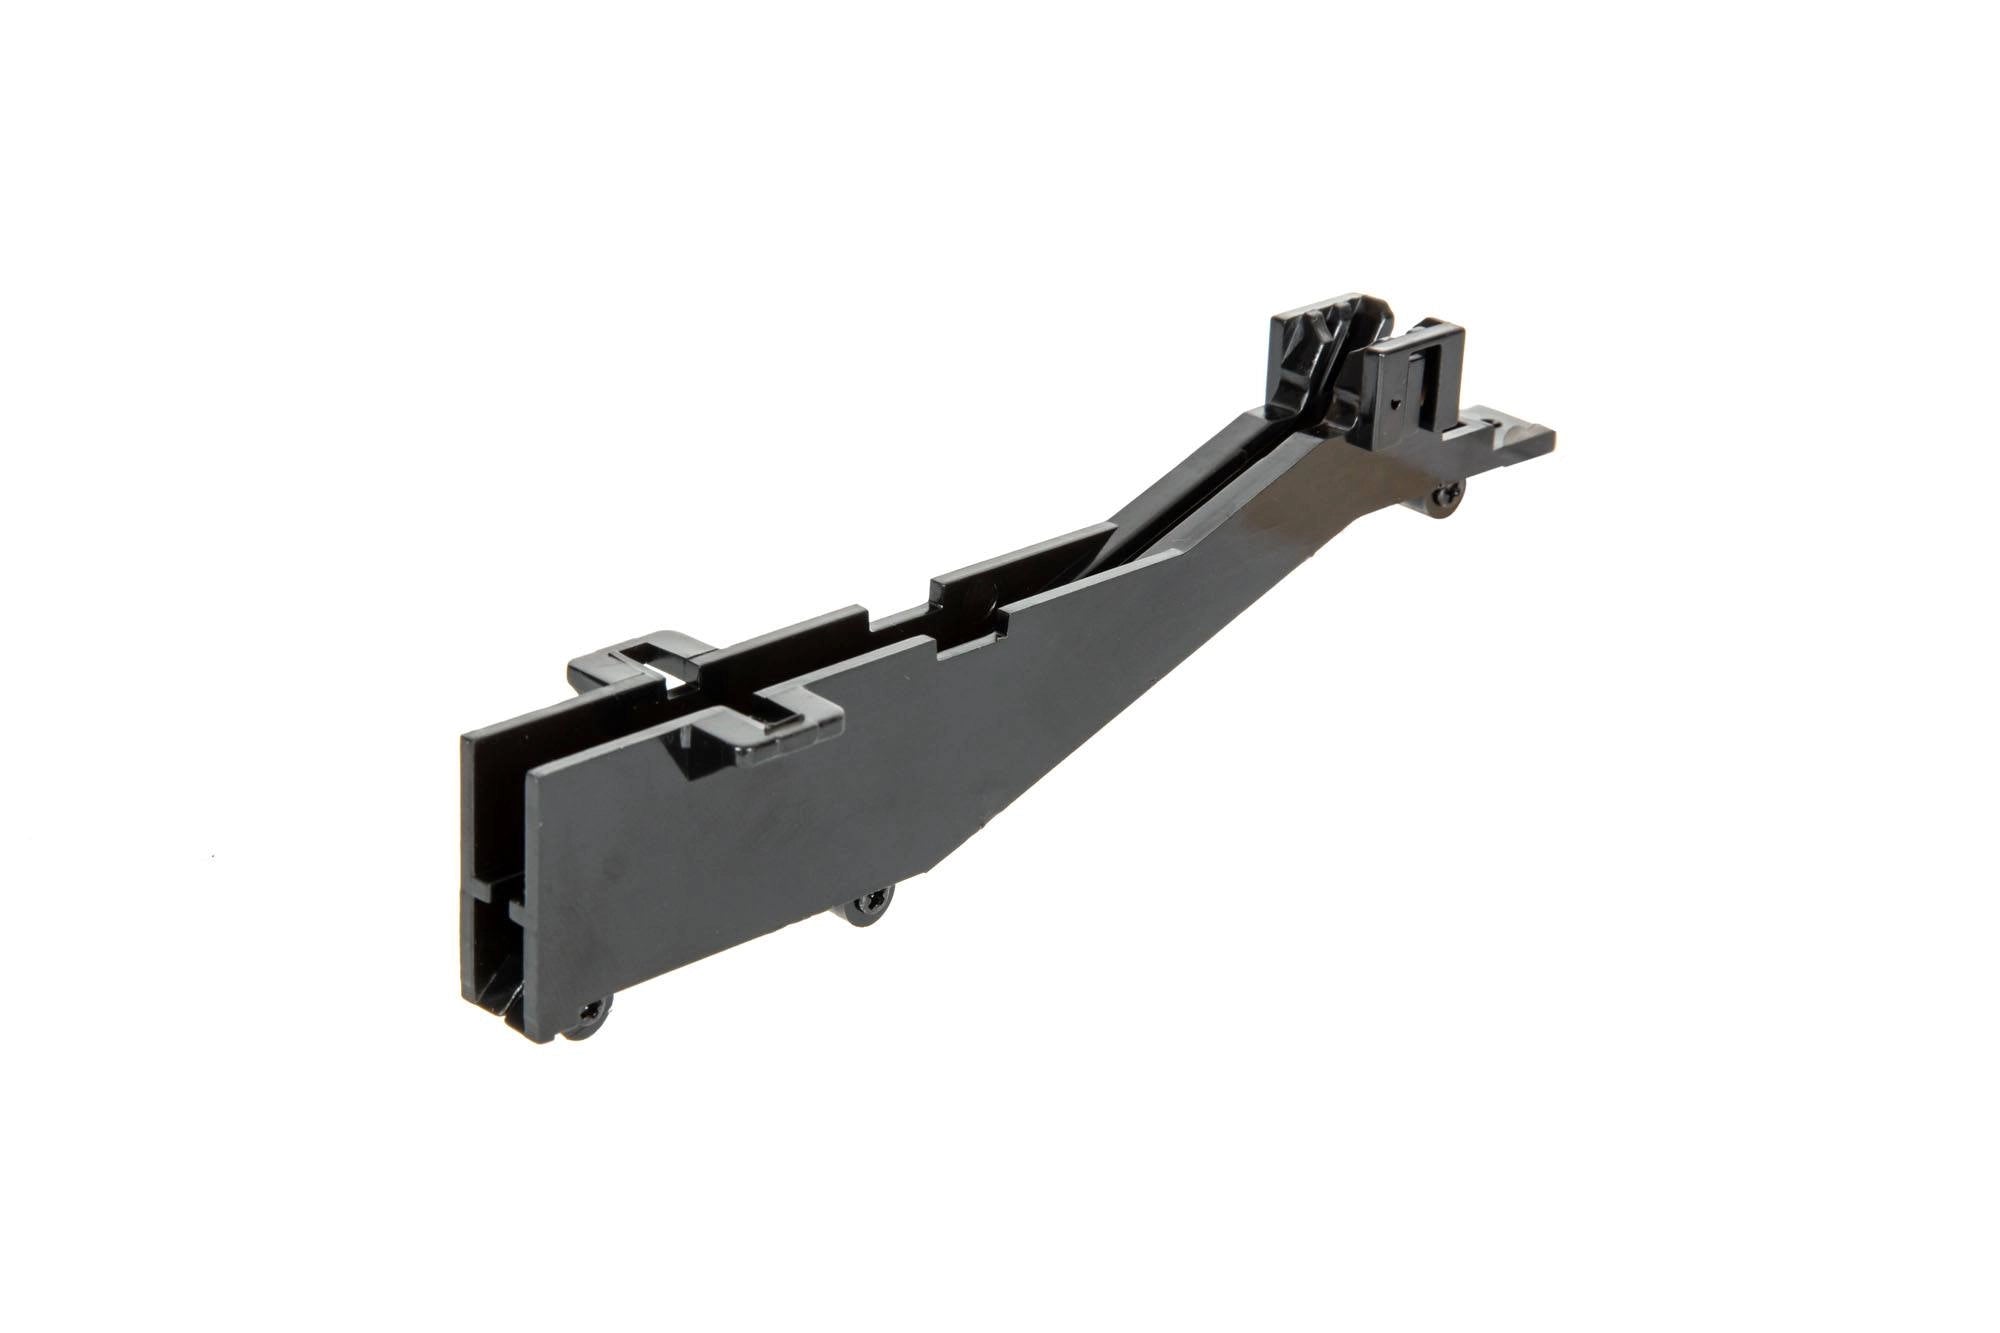 BB feeder ramp for TM AWP and Well MB4401,02,03,06,07,08,09